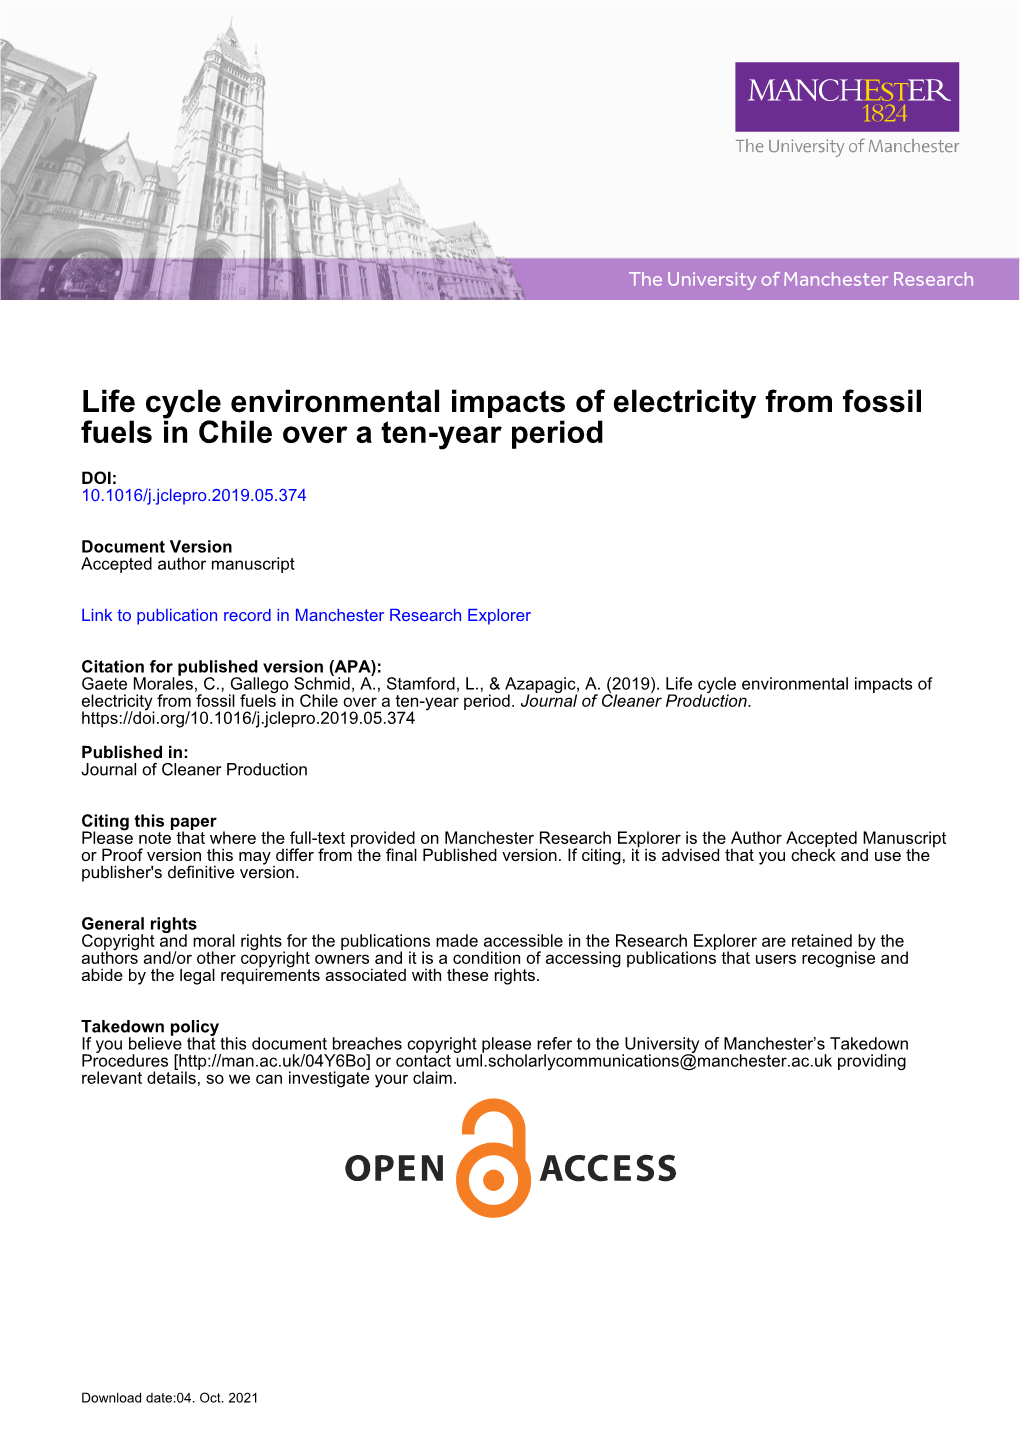 Environmental Impaccts of Fossil Fuel Electricity in Chile